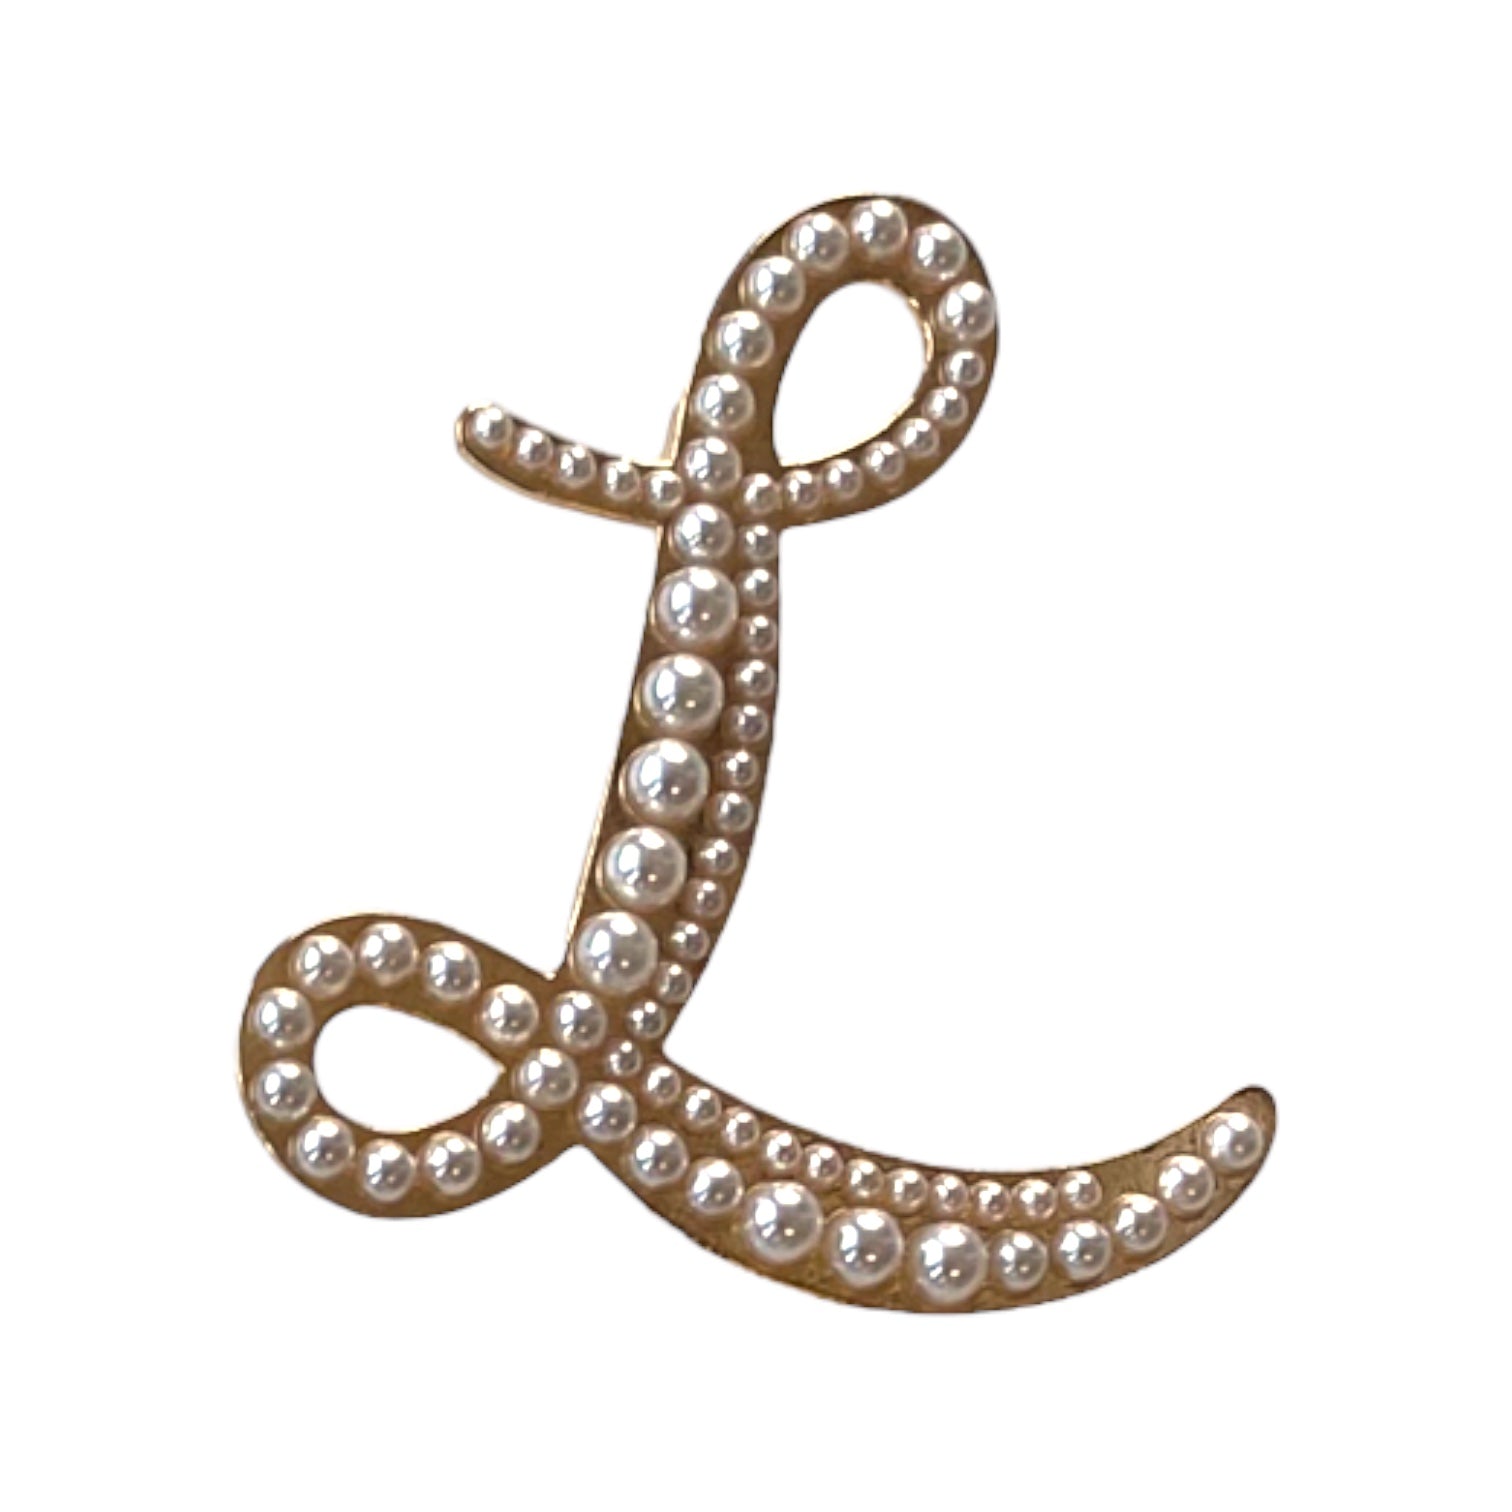 Pearled Letter “L” Brooch